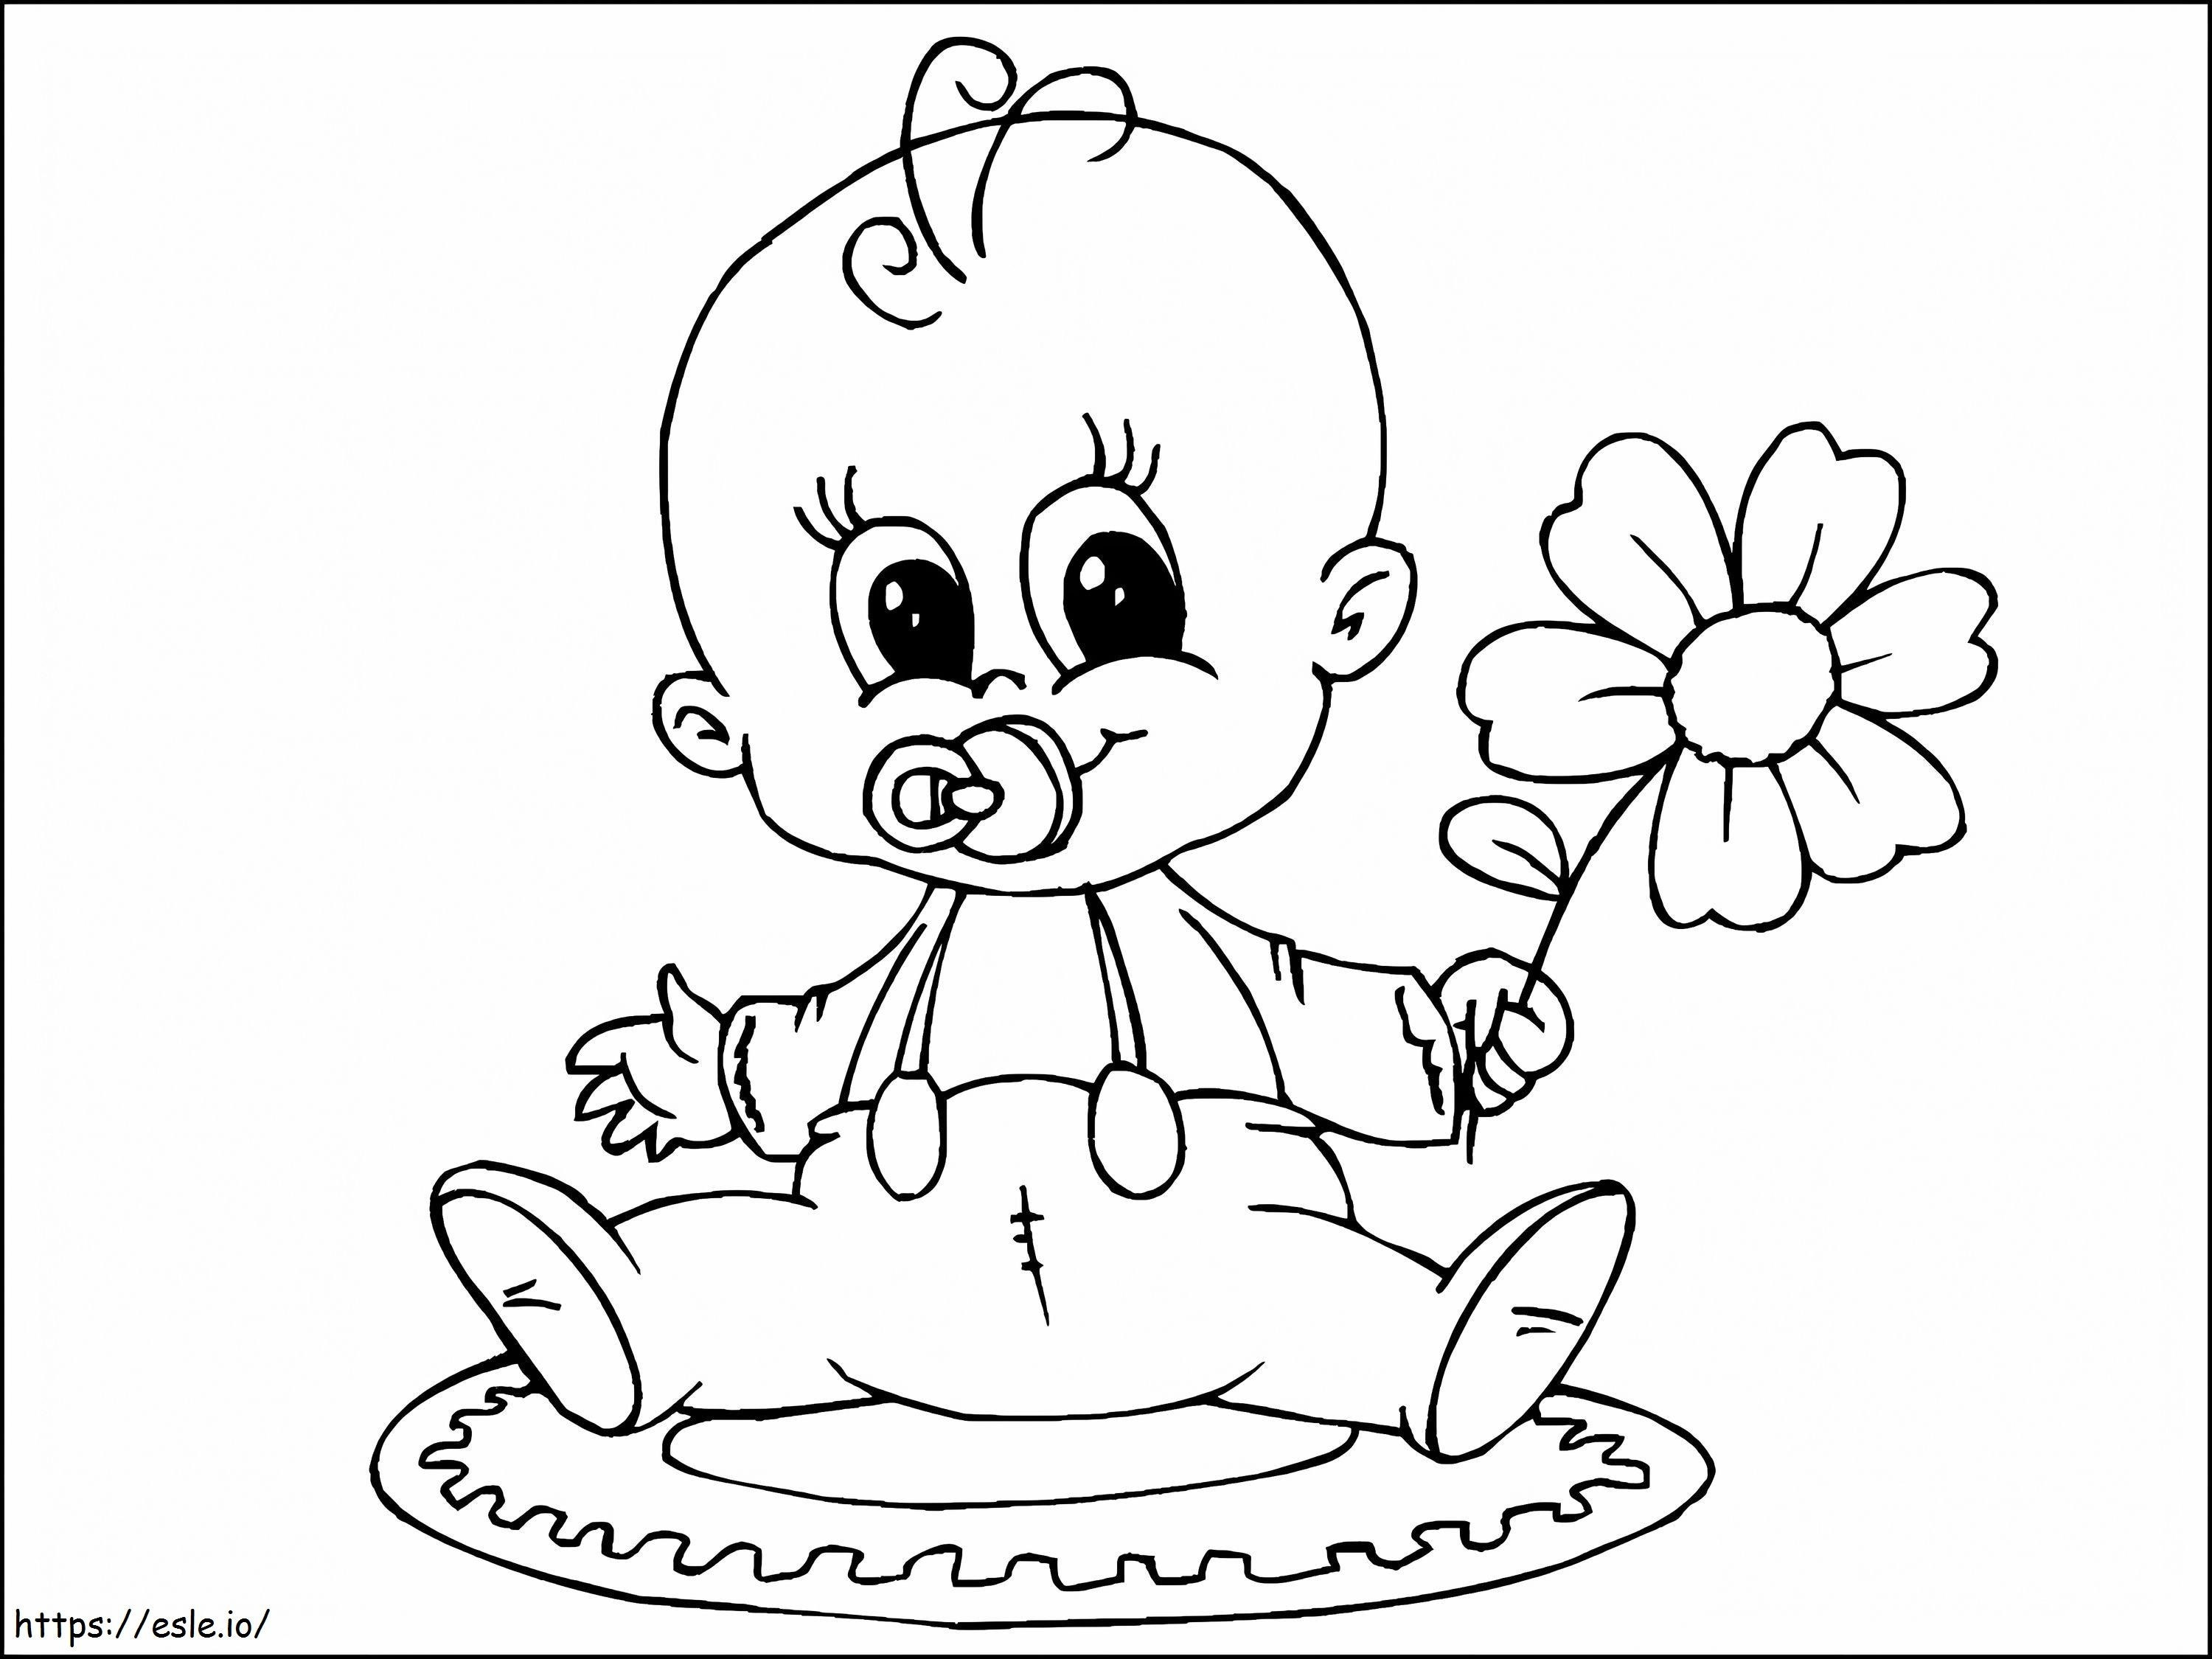 Babywithflowera4 coloring page